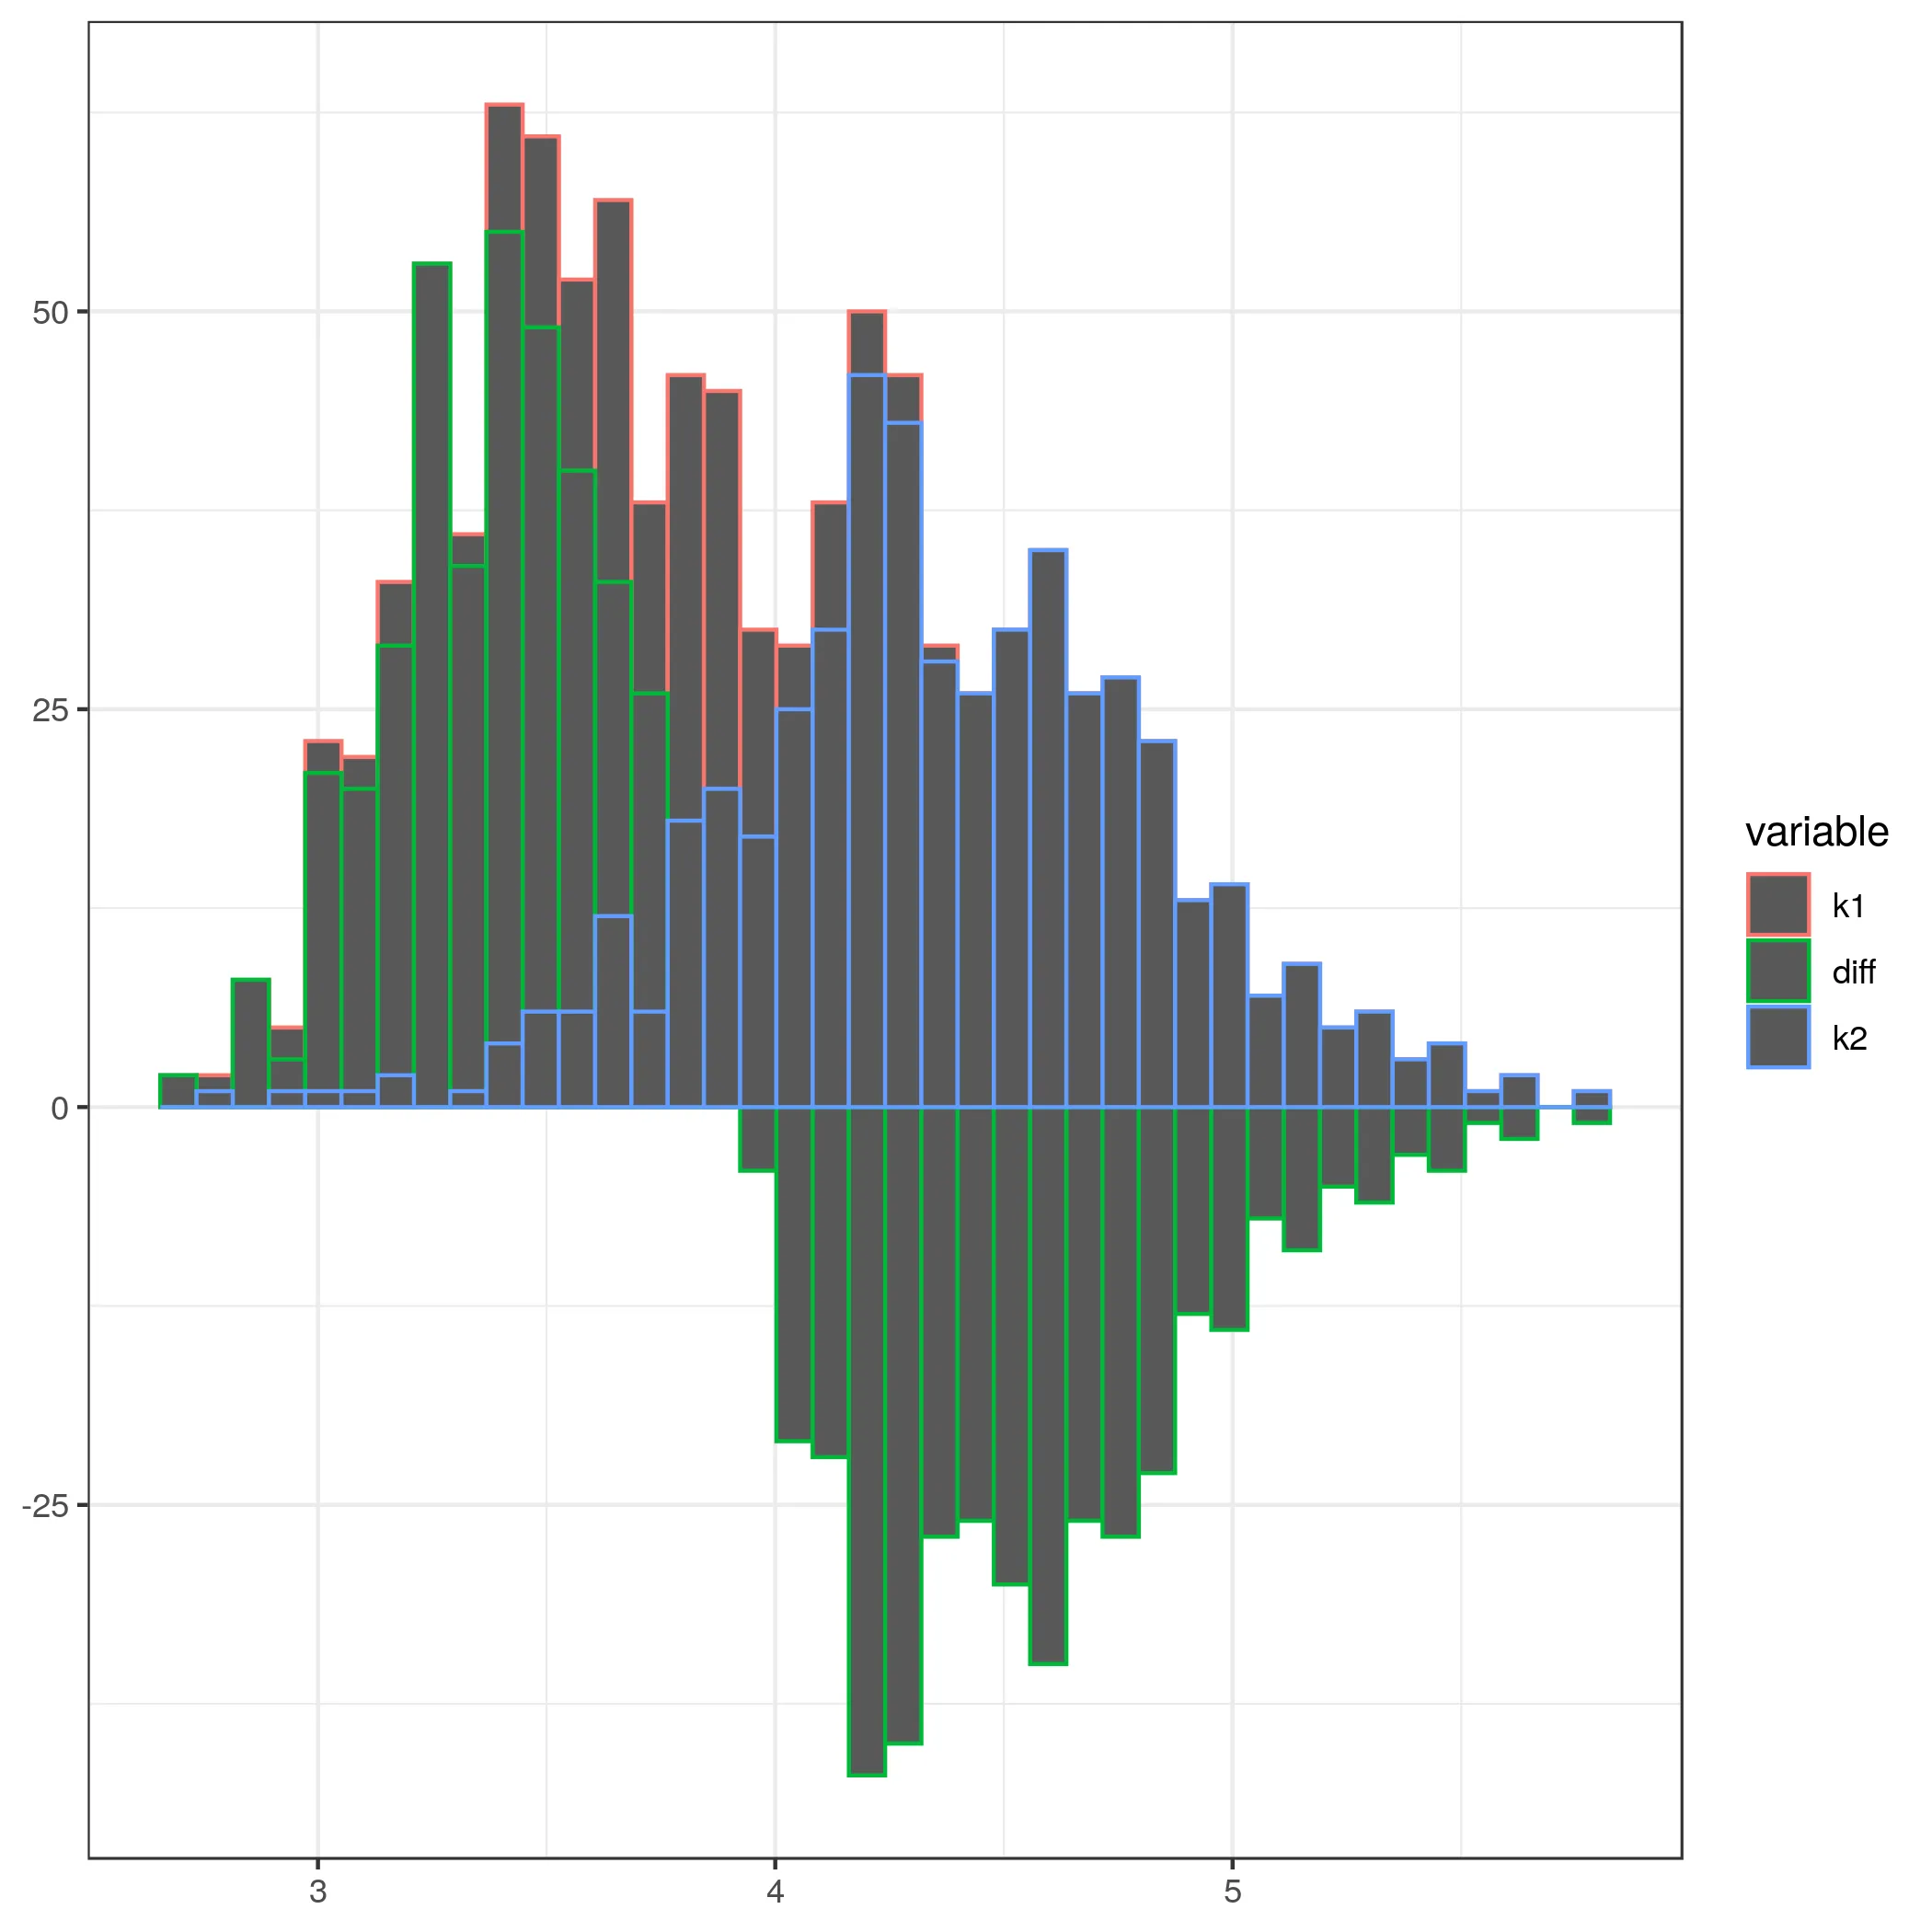 Final histogram with bars showing the difference between two distributions.